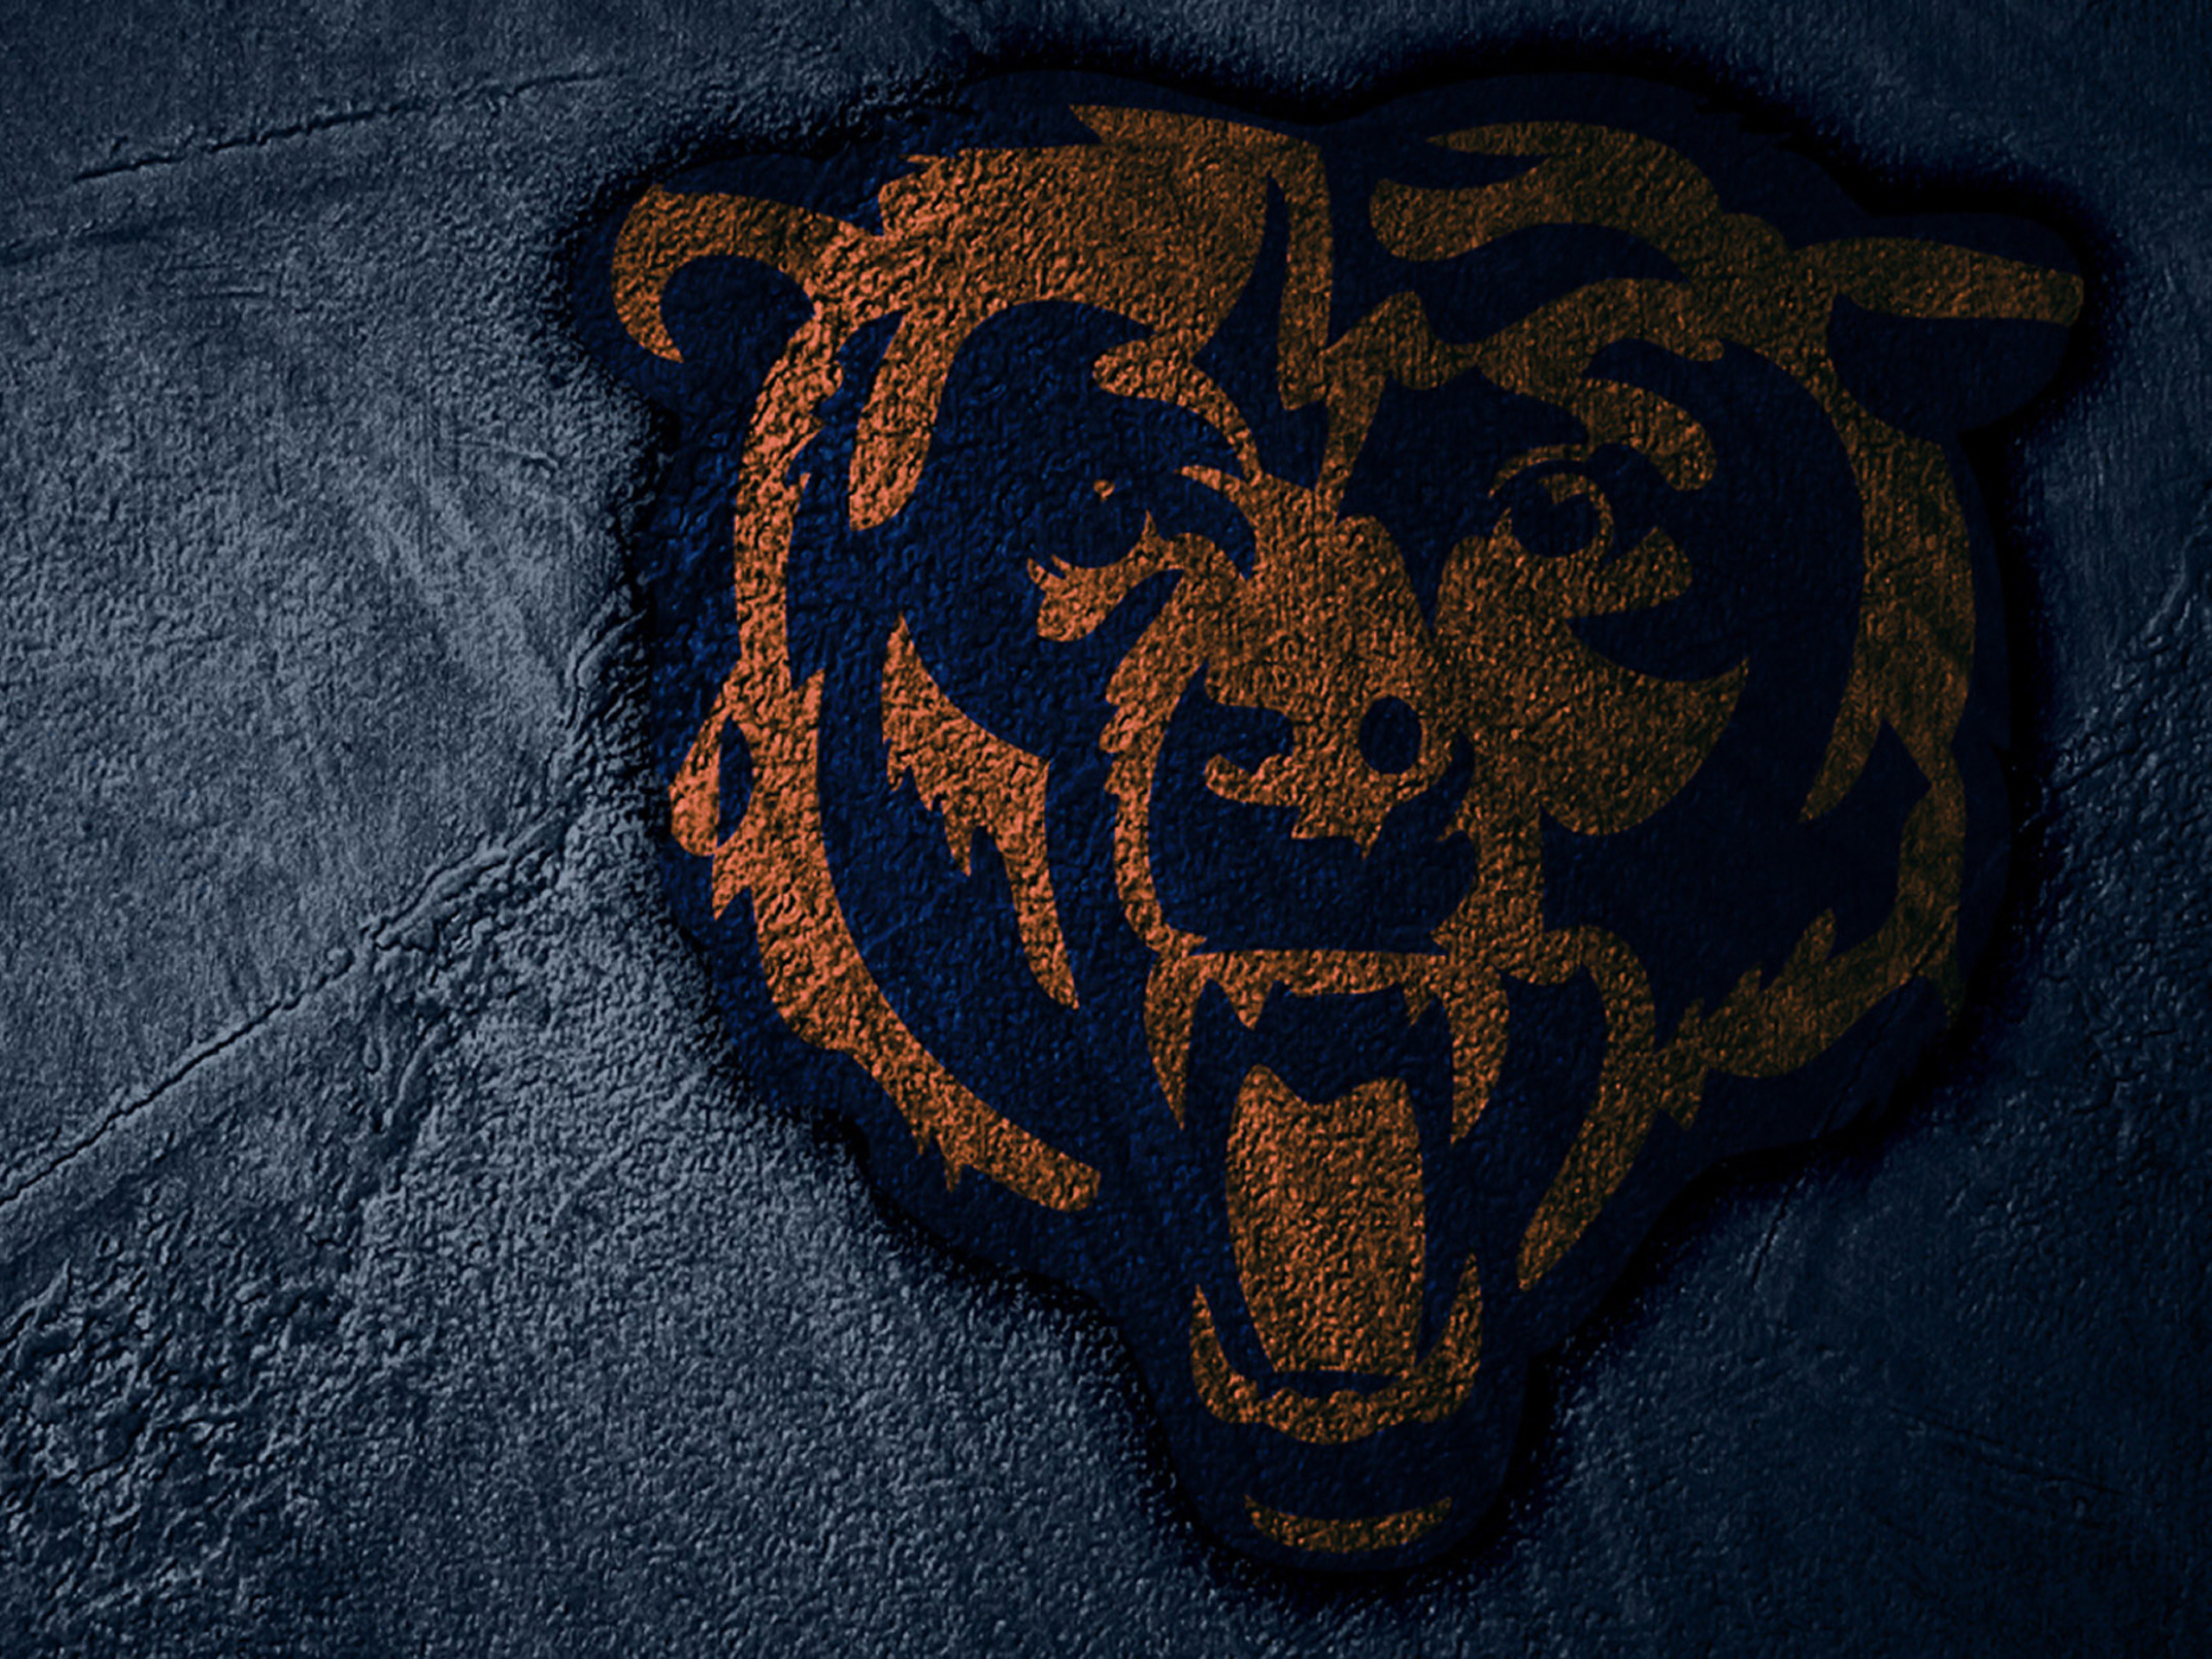 2560x1920 chicago bears backgrounds Chicago Bears Wallpaper by Geosammy | HD  Wallpapers | Pinterest | Hd wallpaper and Wallpaper